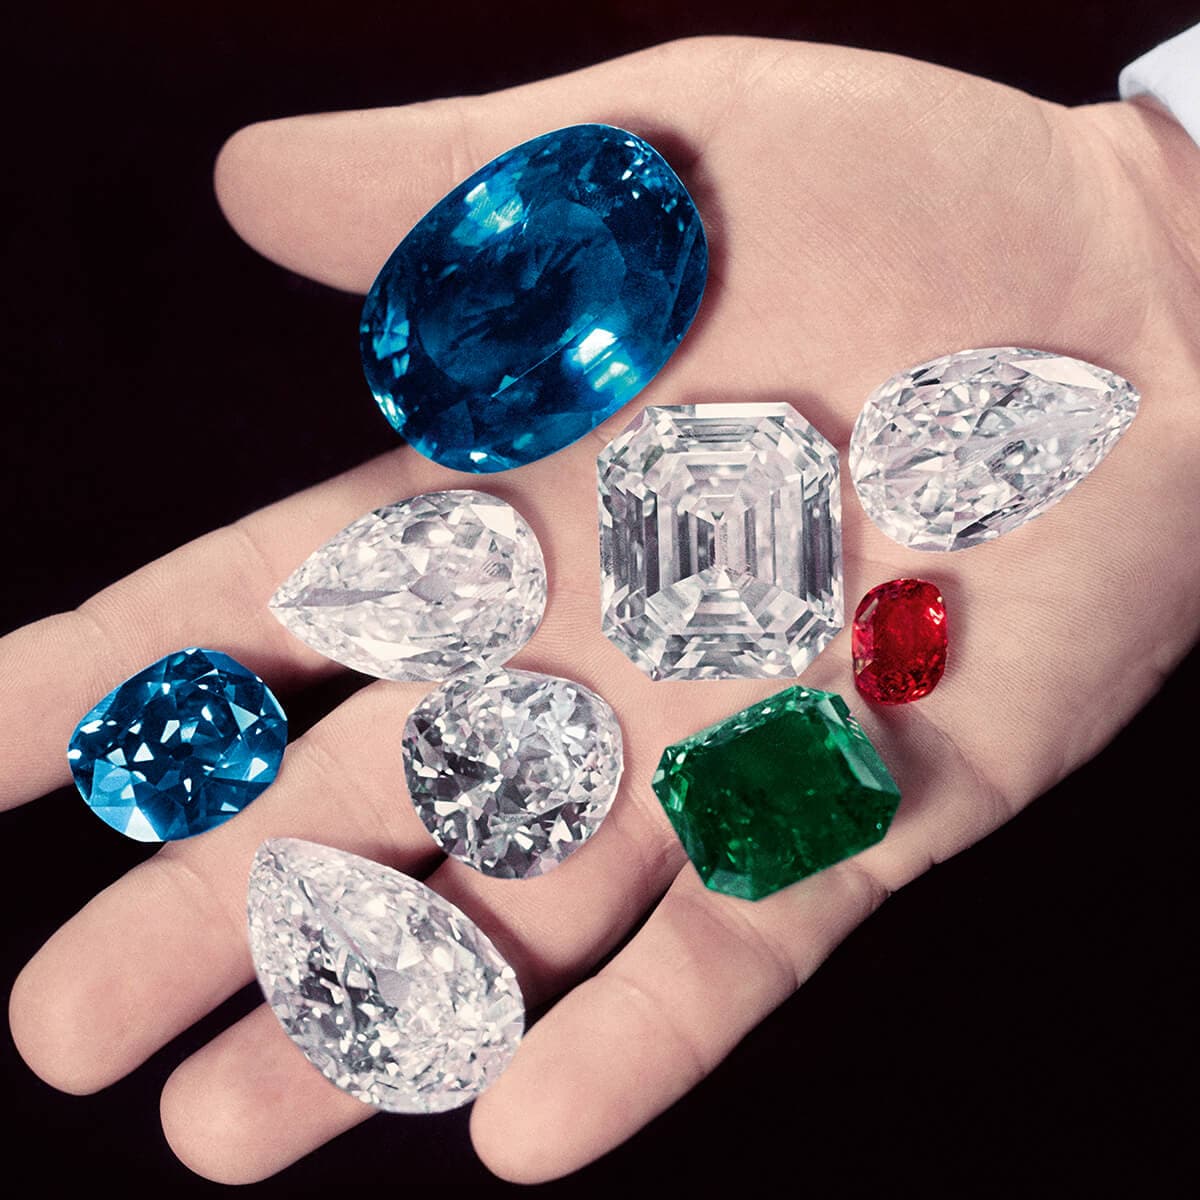 Mr. Winston holds the world's rarest gemstones in the palm of his hand